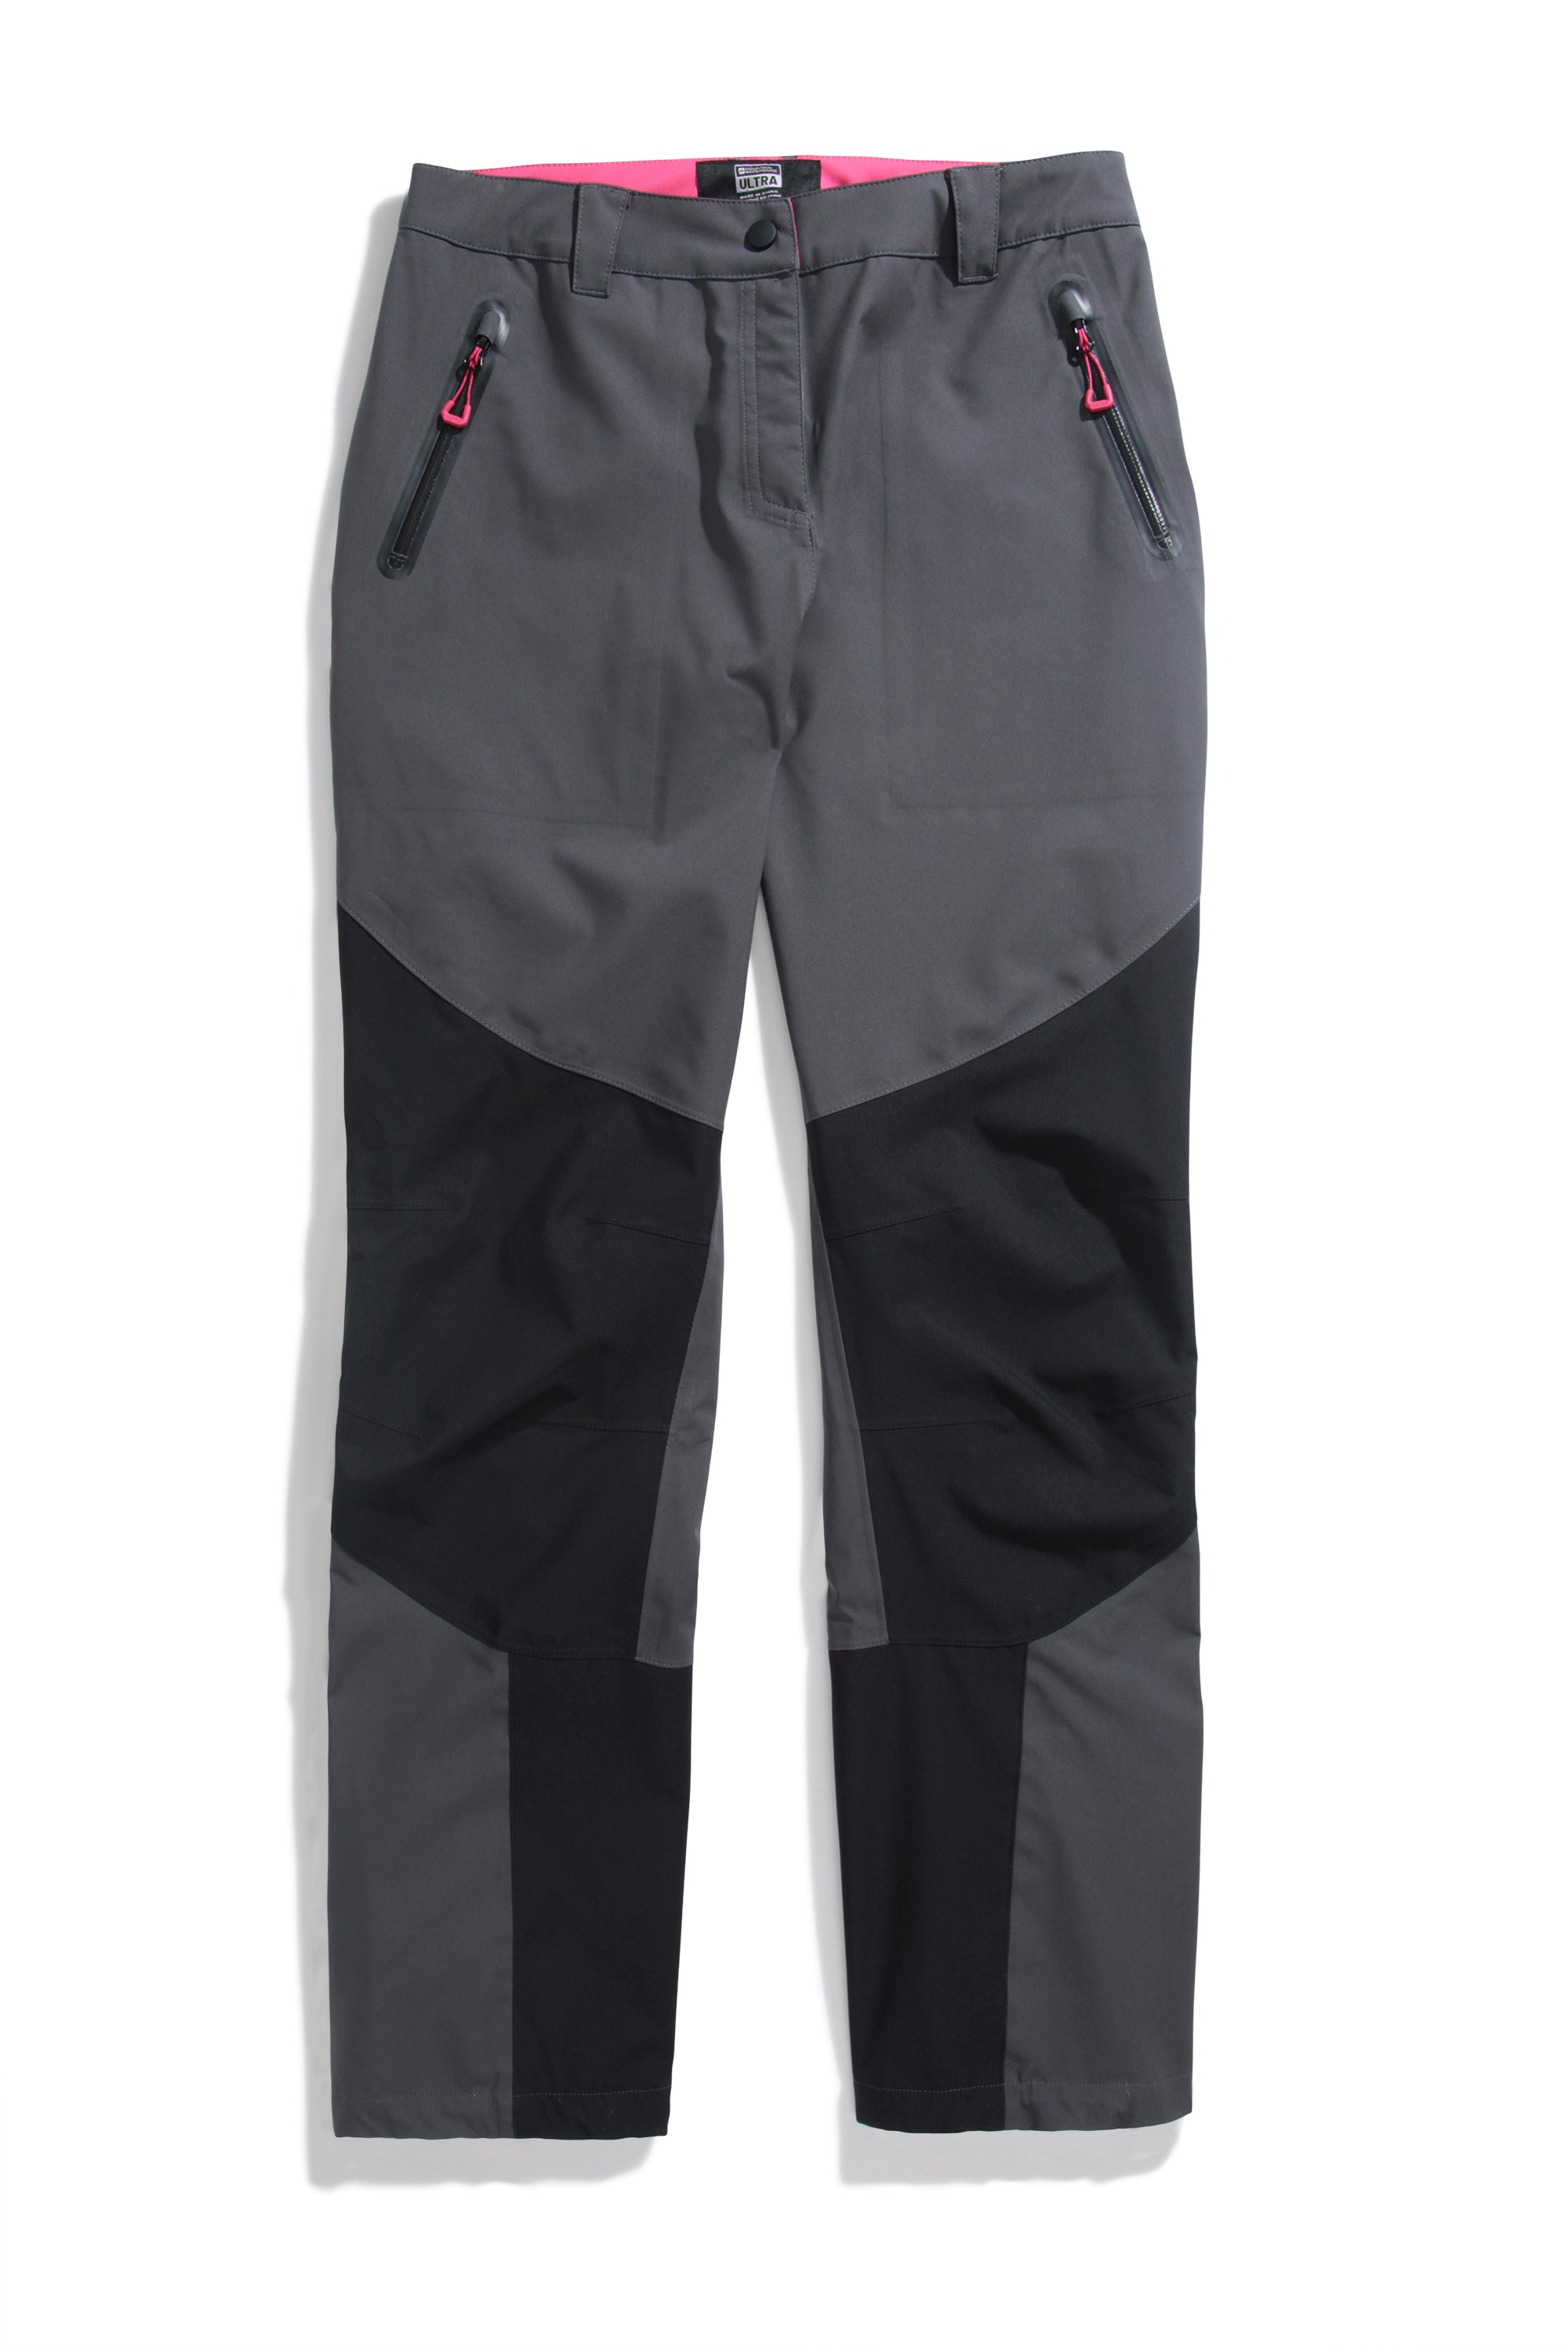 Women's Small Water Repellant Warm-up Pants W/Pockets- CO